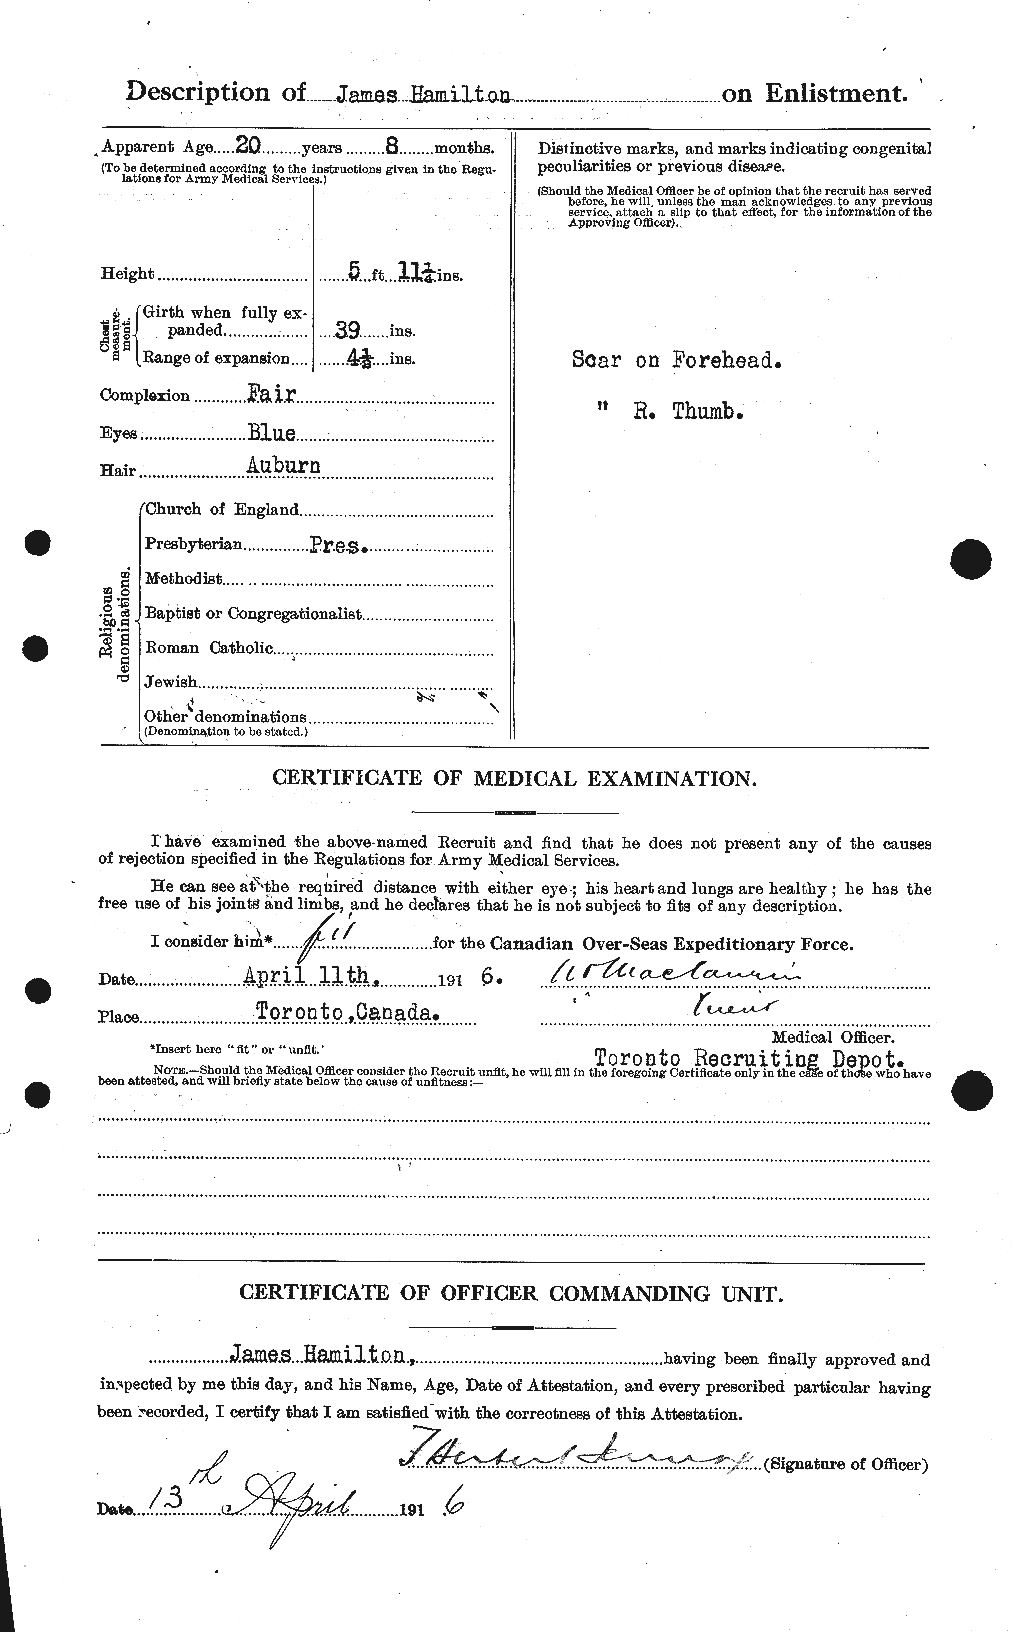 Personnel Records of the First World War - CEF 372958b